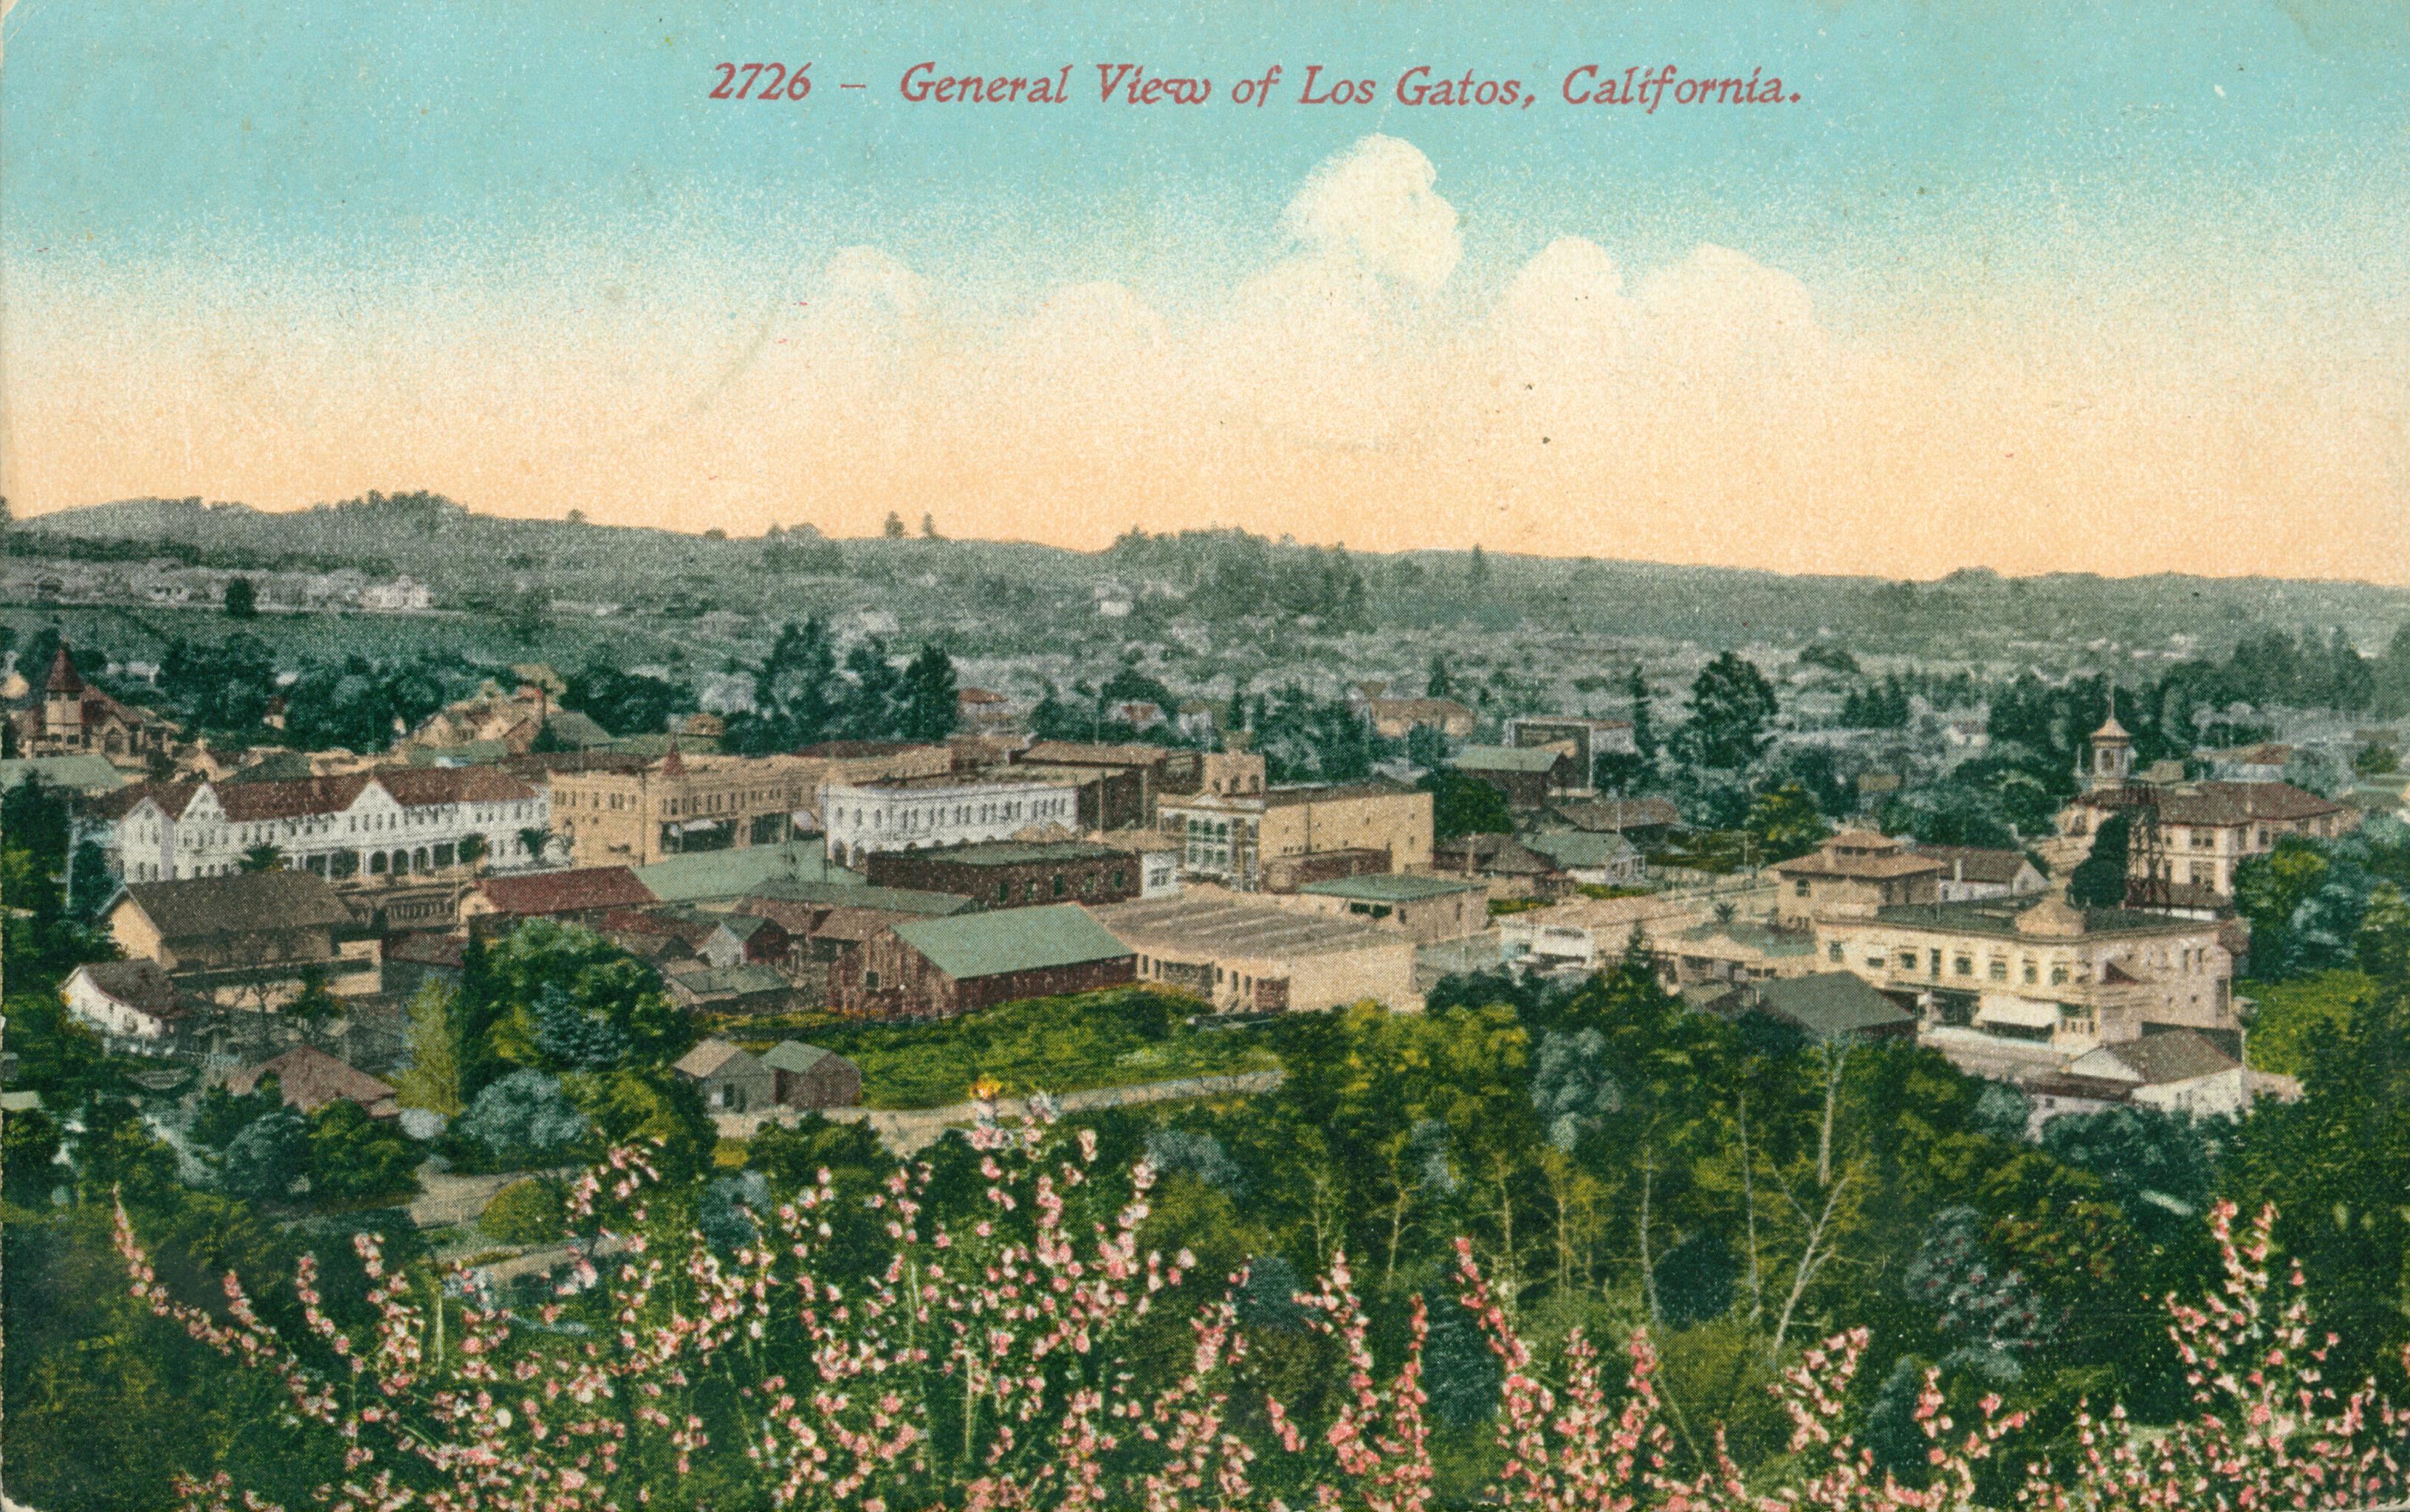 Vista overlook of Los Gatos buildings.  Flowers in foreground with trees in the distance with buildings.